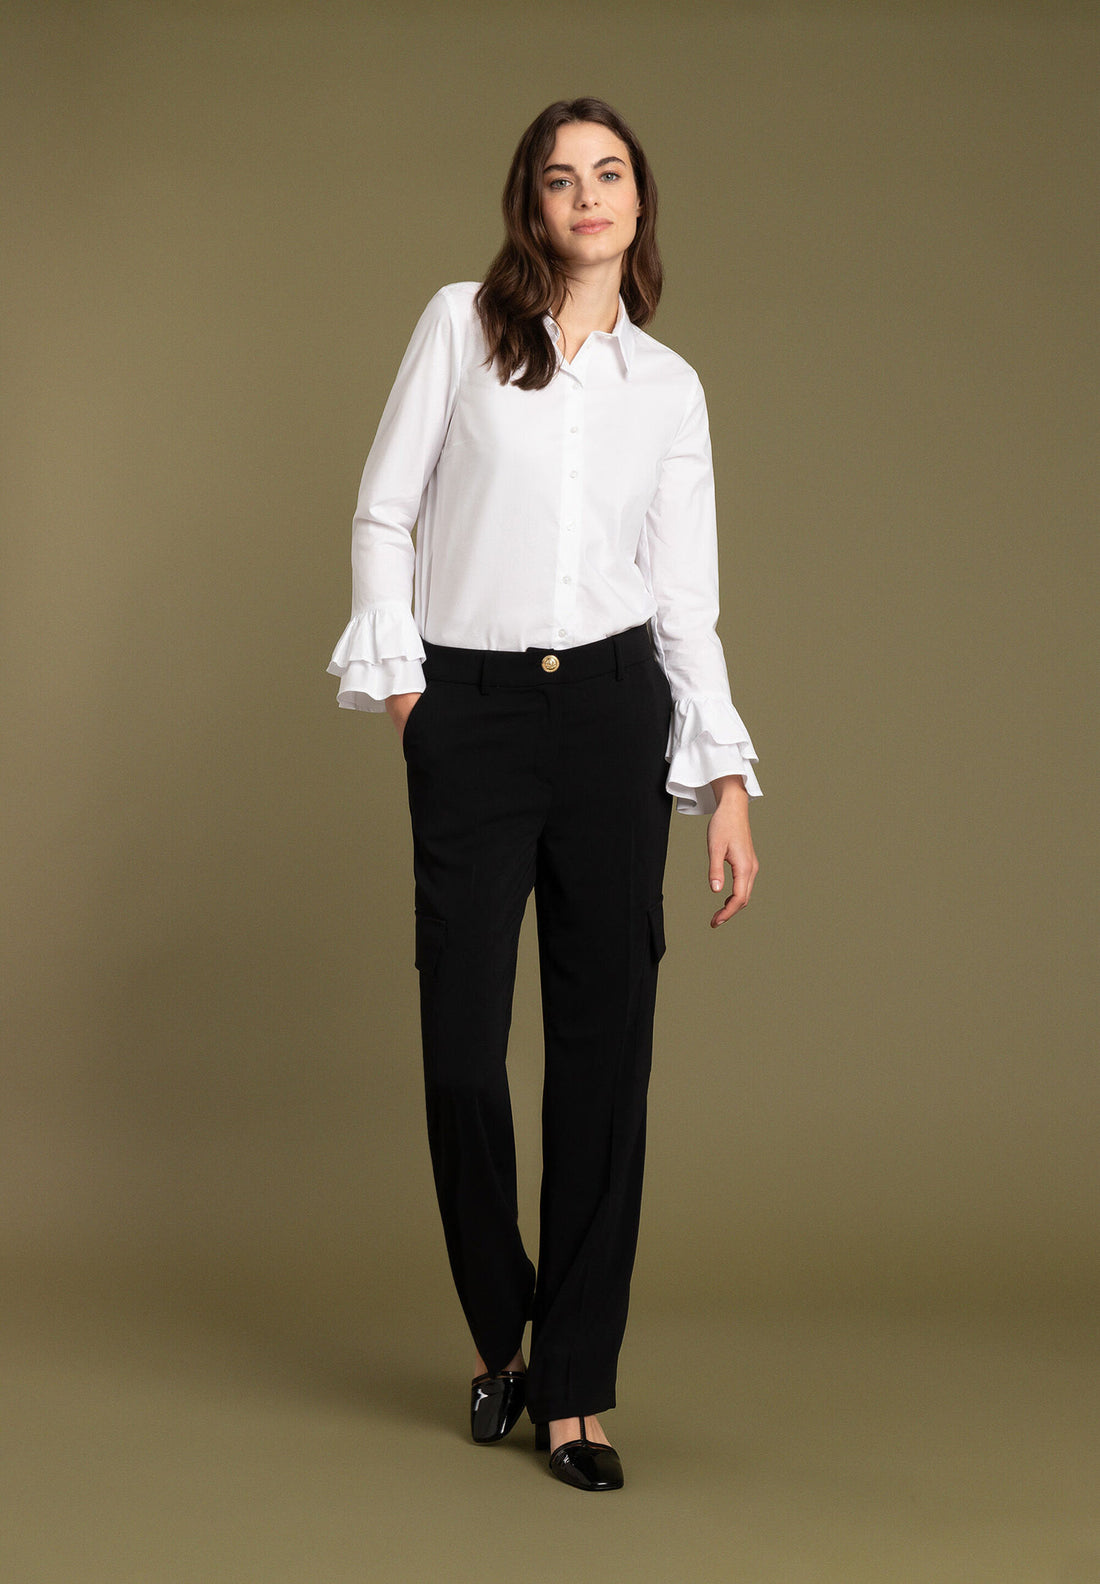 White Blouse With Statement Sleeves_41012005_0010_02